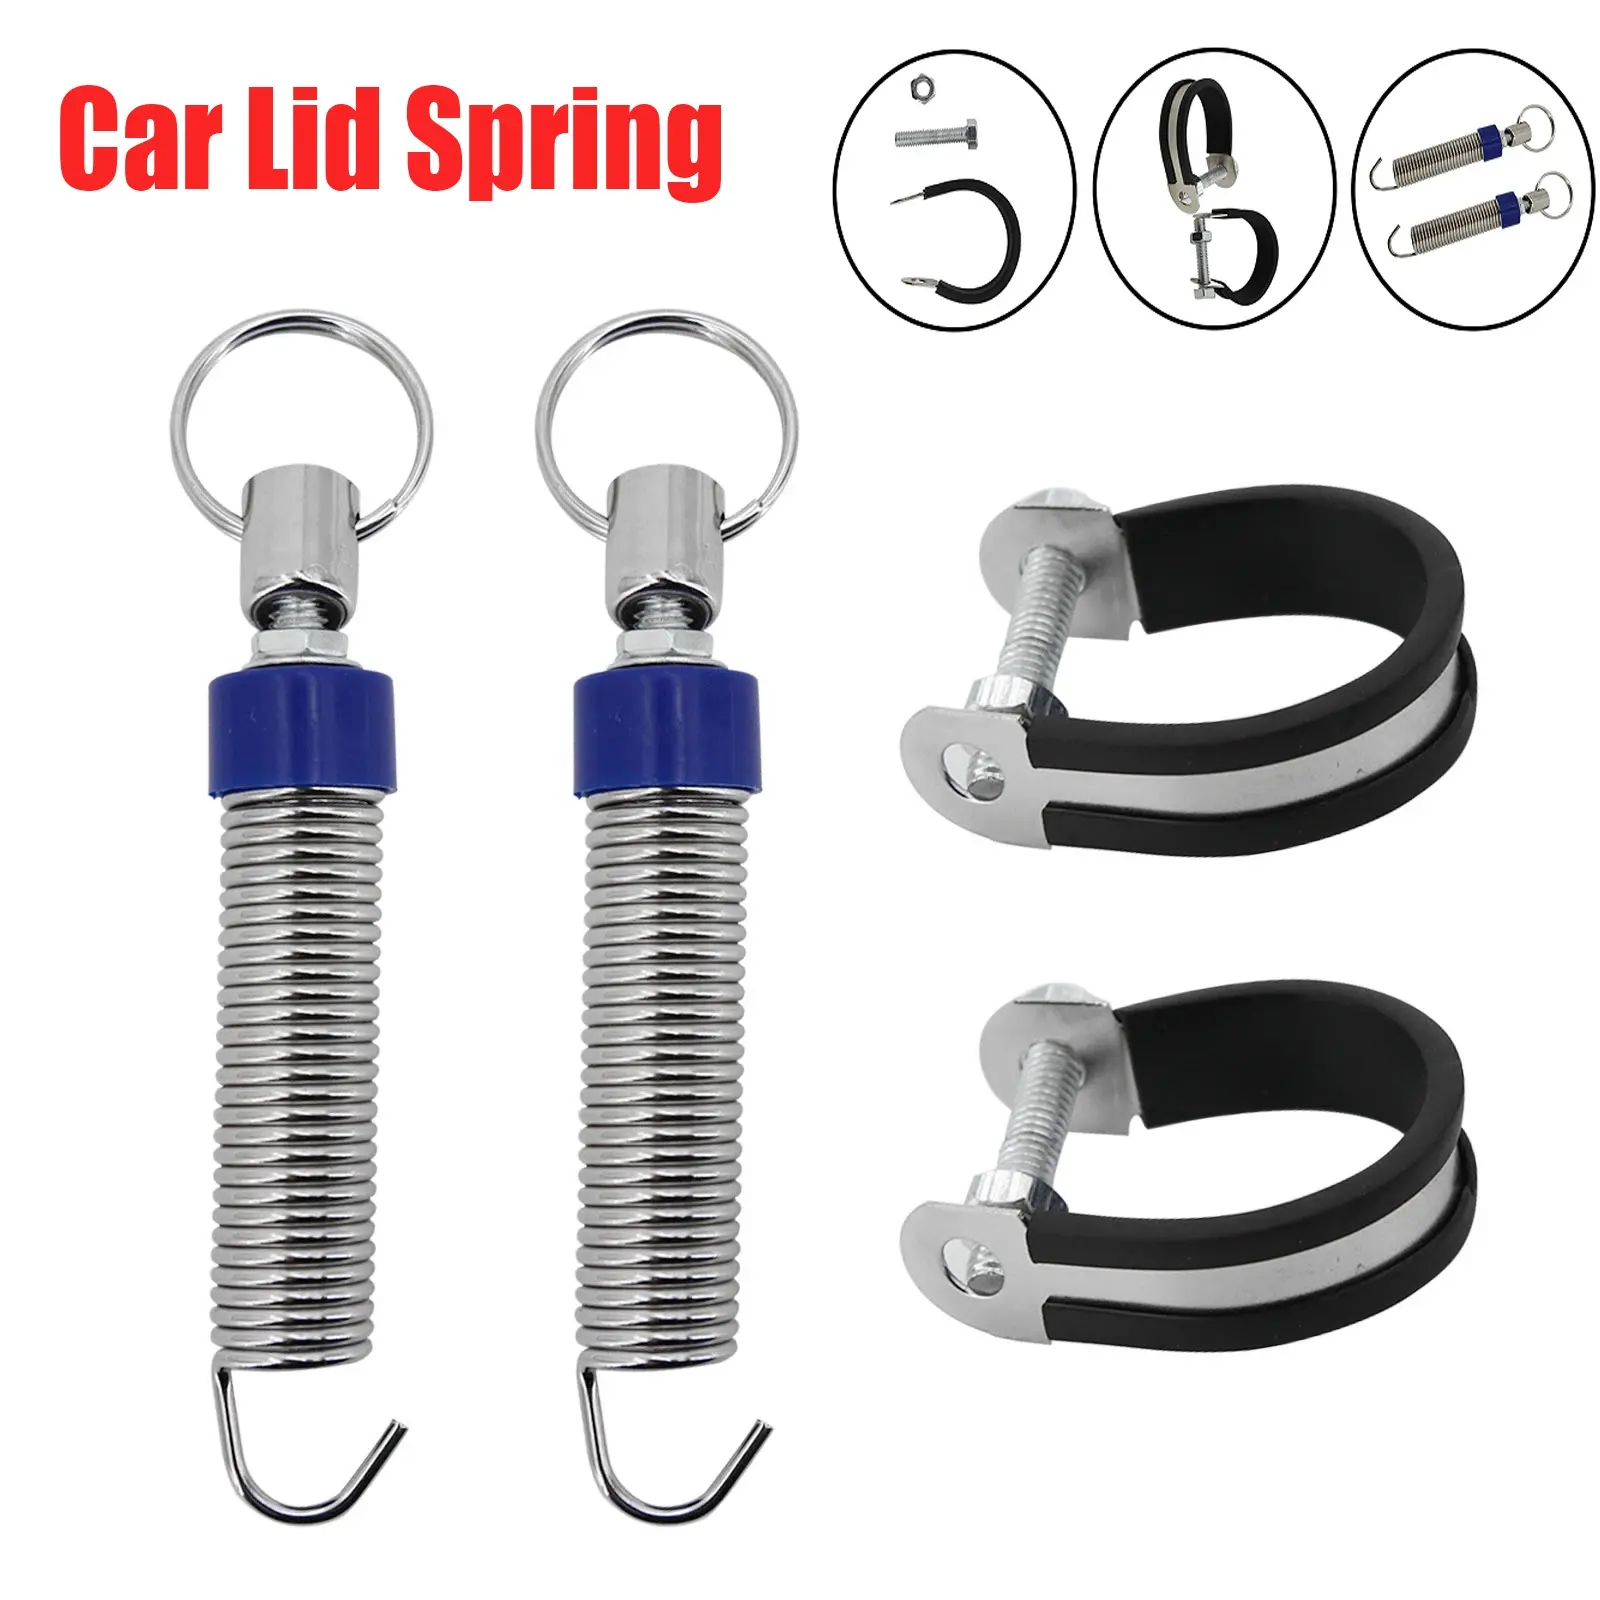 Car Boot Lid Lifting Spring Trunk Spring Lifting Device Car Accessories Car trunk lifter Trunk Lid Automatically Open Tool